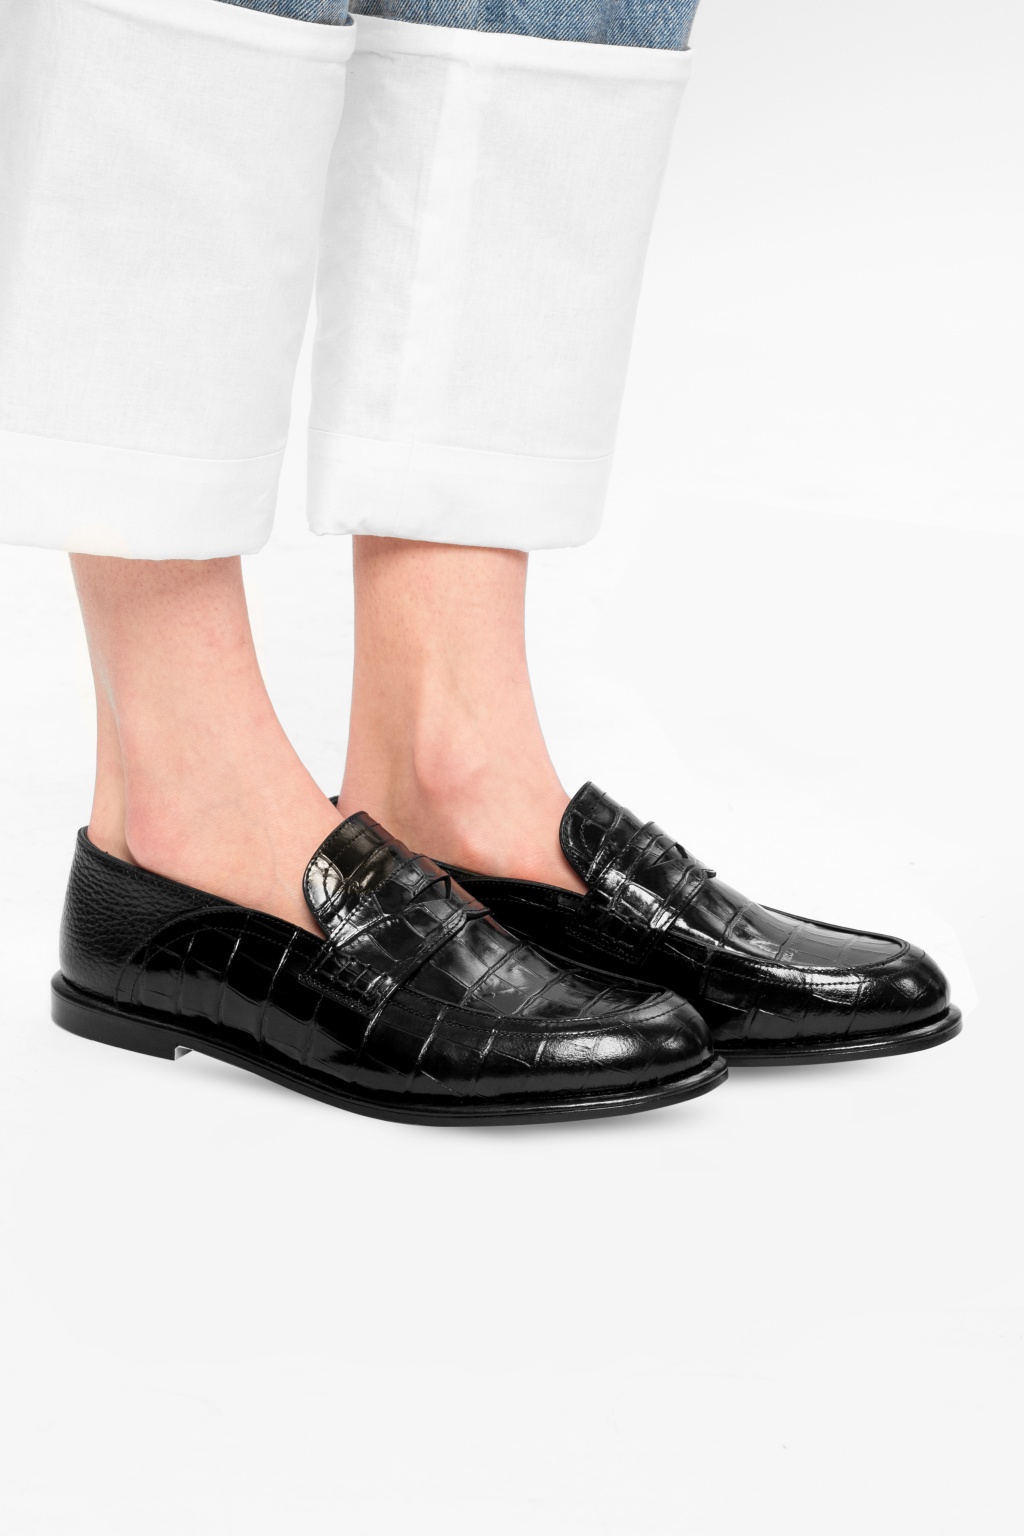 Loewe Leather loafers Women's Shoes | Vitkac